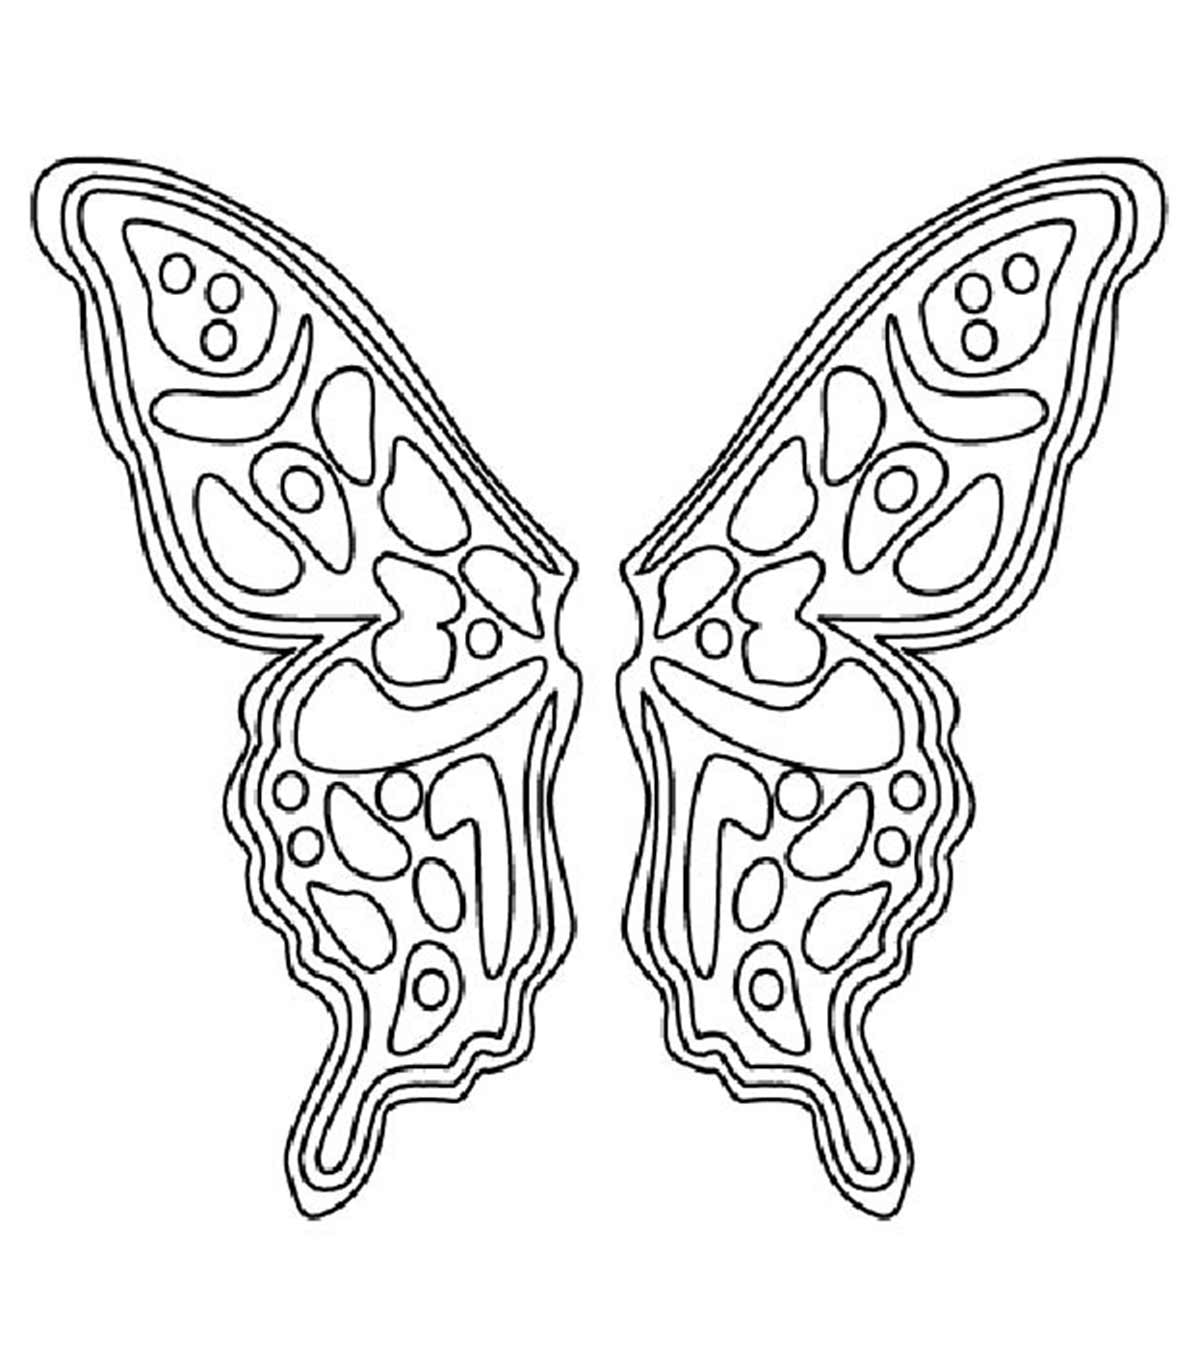 Top 20 Pattern Coloring Pages For Your Toddler